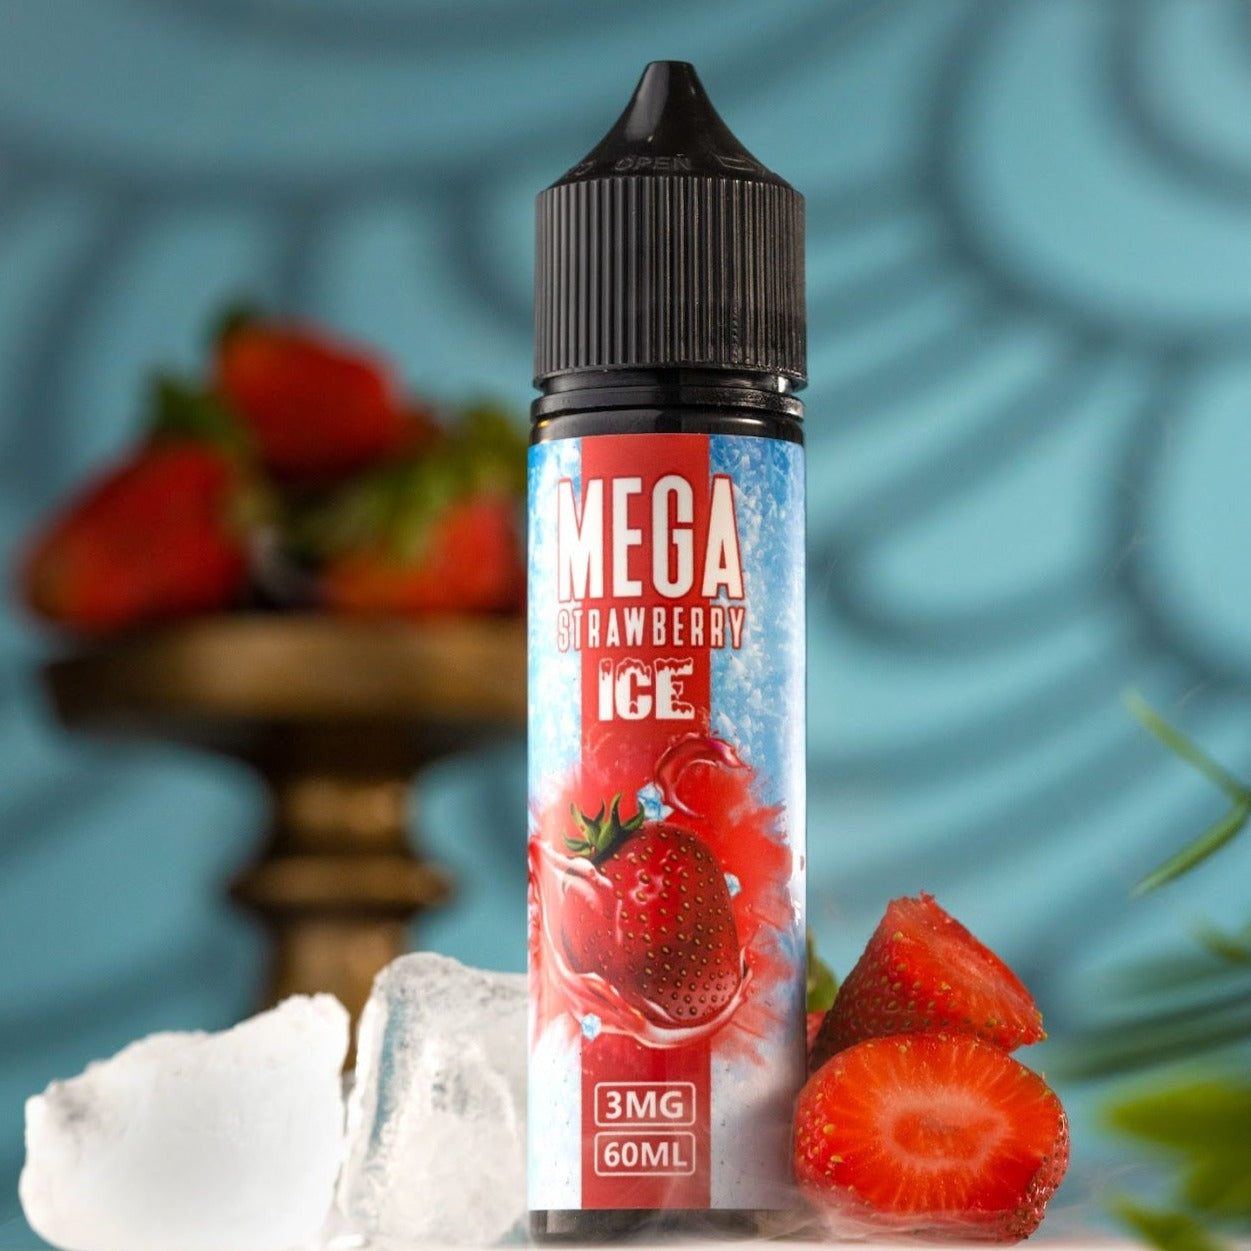 Strawberry Ice vape bottle by GRAND - Enjoy the refreshing blend of ripe strawberries and icy menthol in this e-liquid